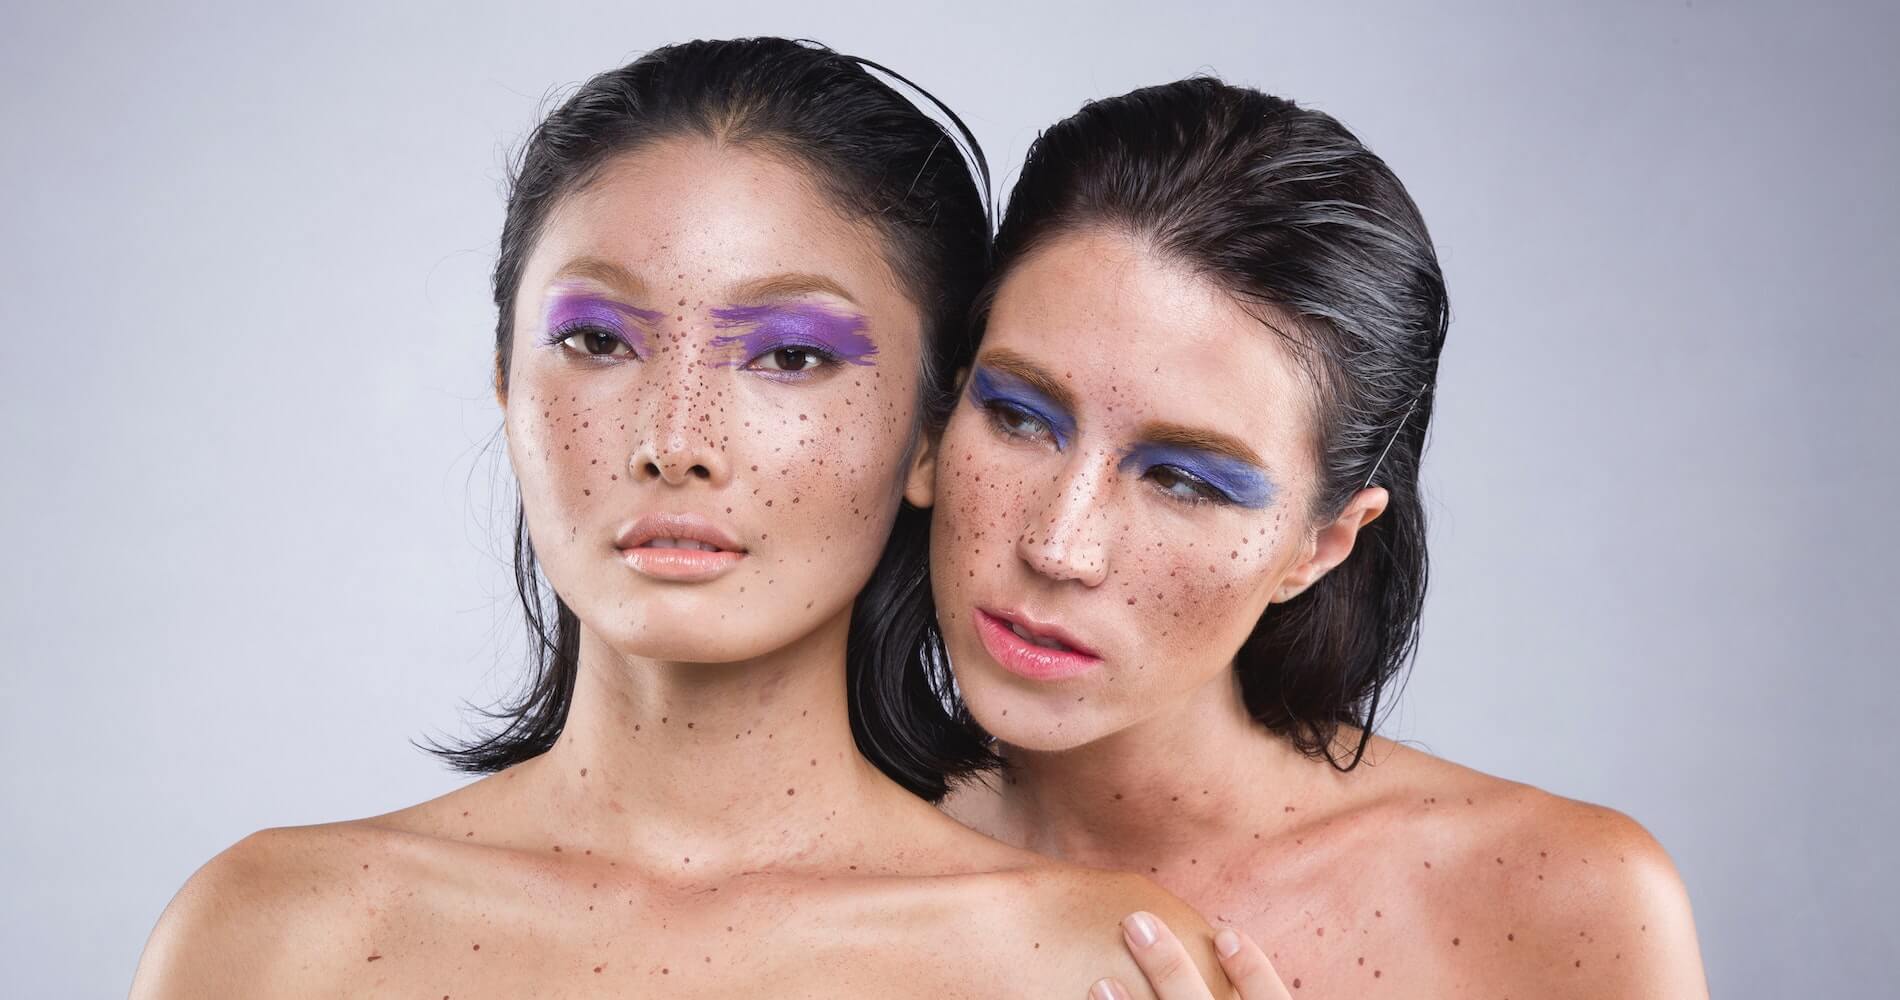 Two women with henna freckles on their faces